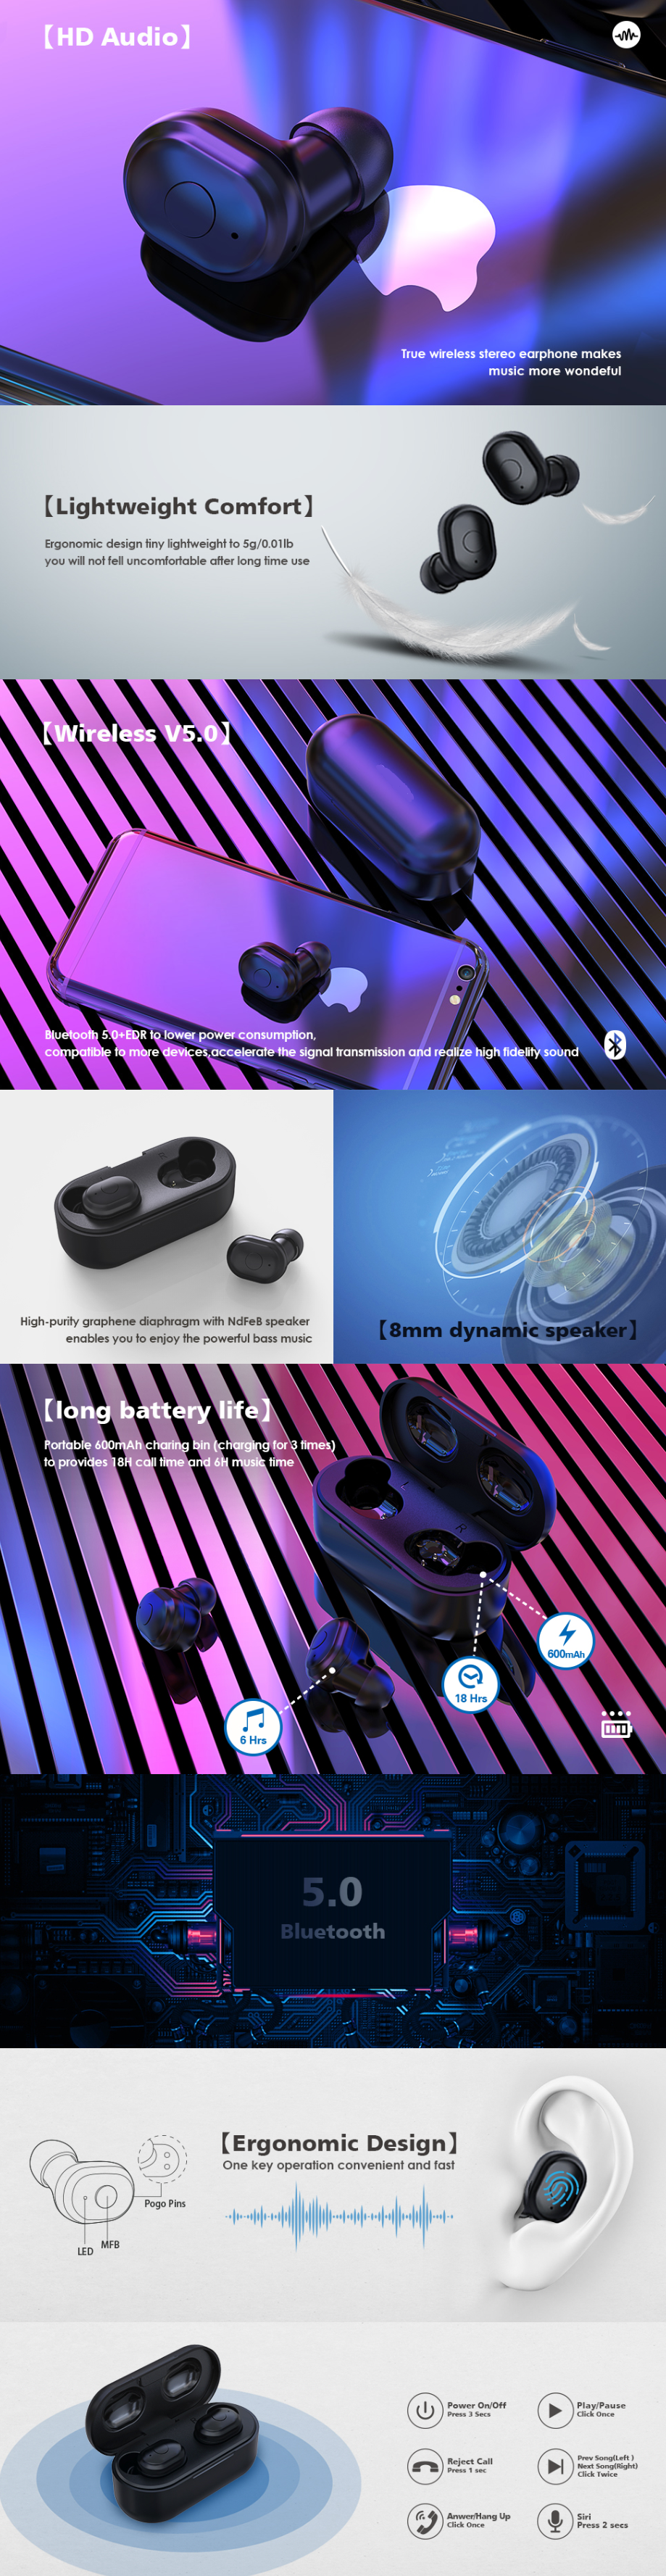 TWS China Manufacturer, TWS China Factory, TW01 TWS Earbuds, TW01 Bluetooth Headset, TW01 Bluetooth Earphone, TW01 OEM Manufacturer Factory,